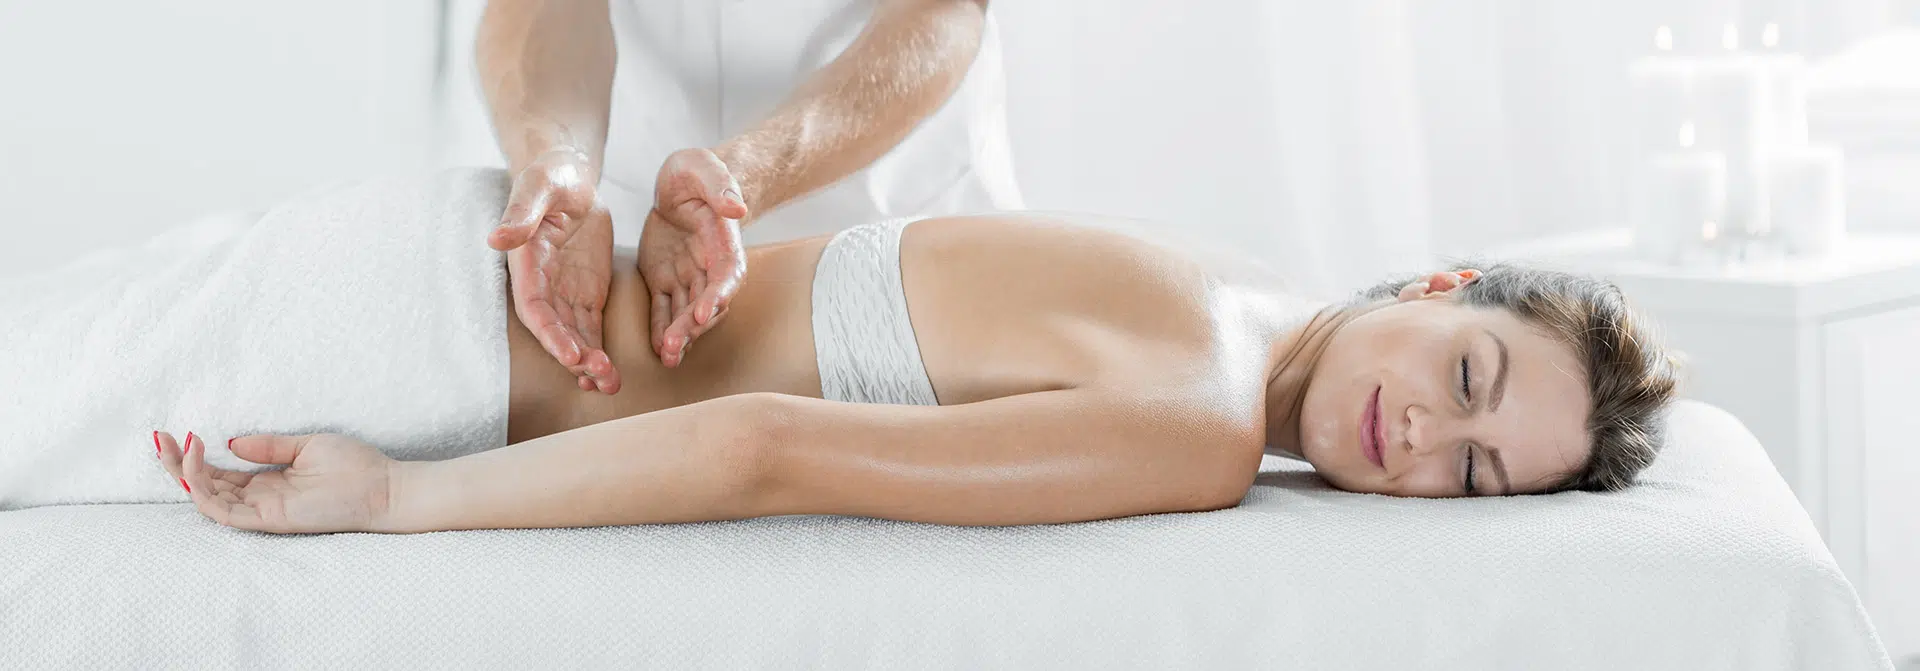 Woman receiving a full body massage on a white massage table